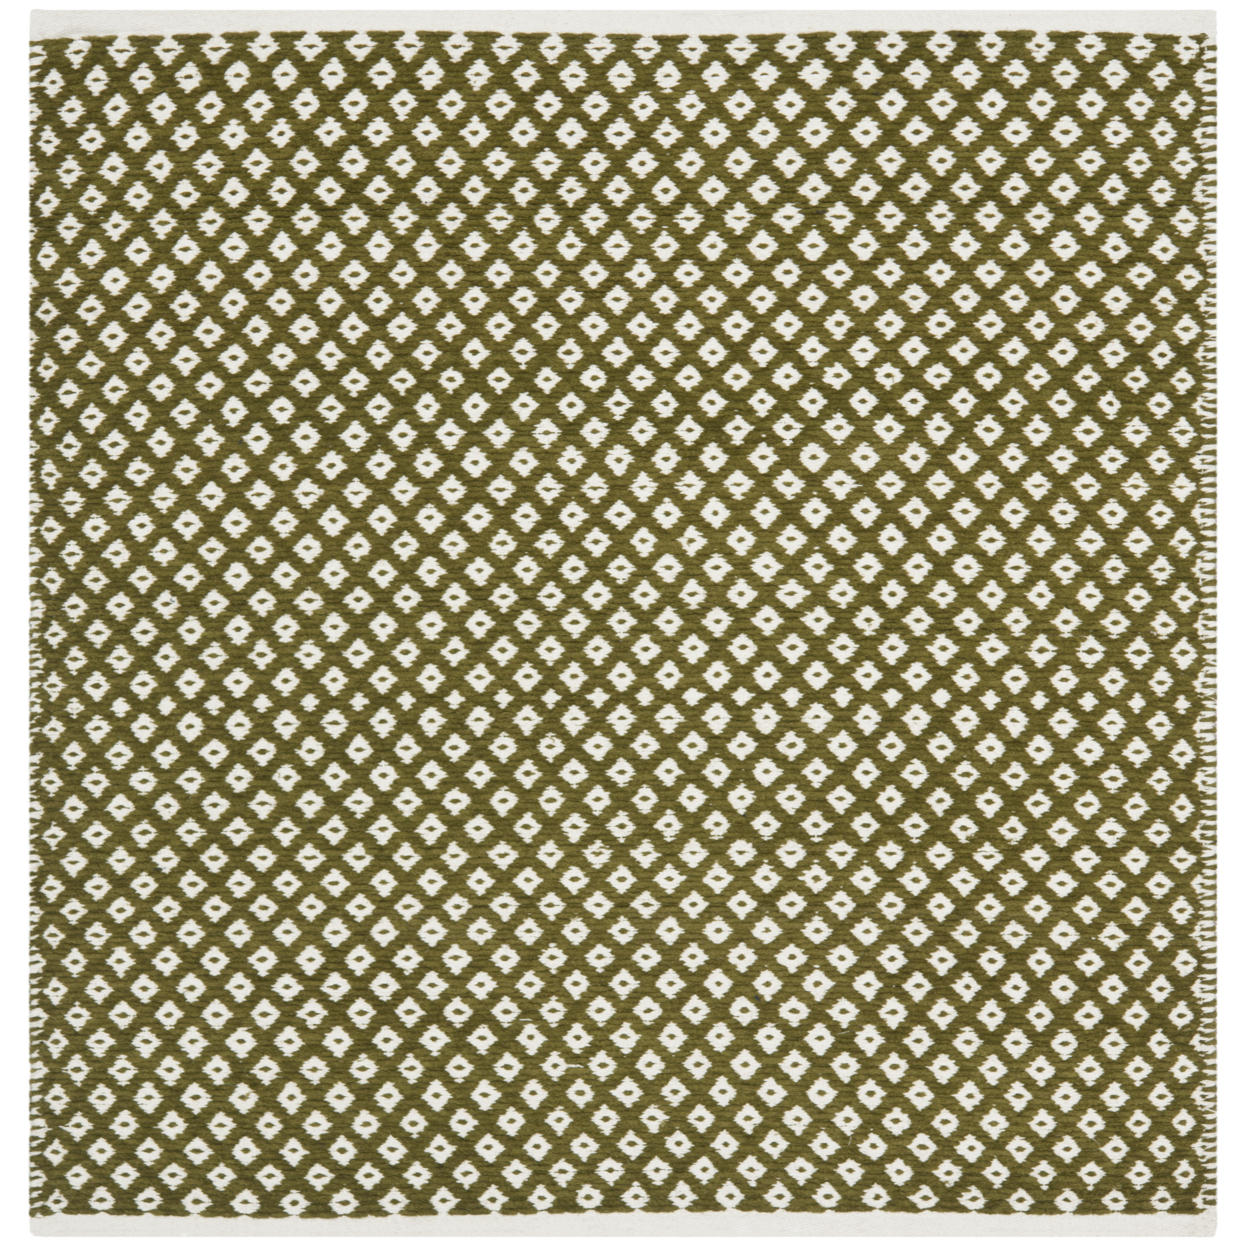 SAFAVIEH Boston Collection BOS685B Handwoven Olive Rug - 4' Square